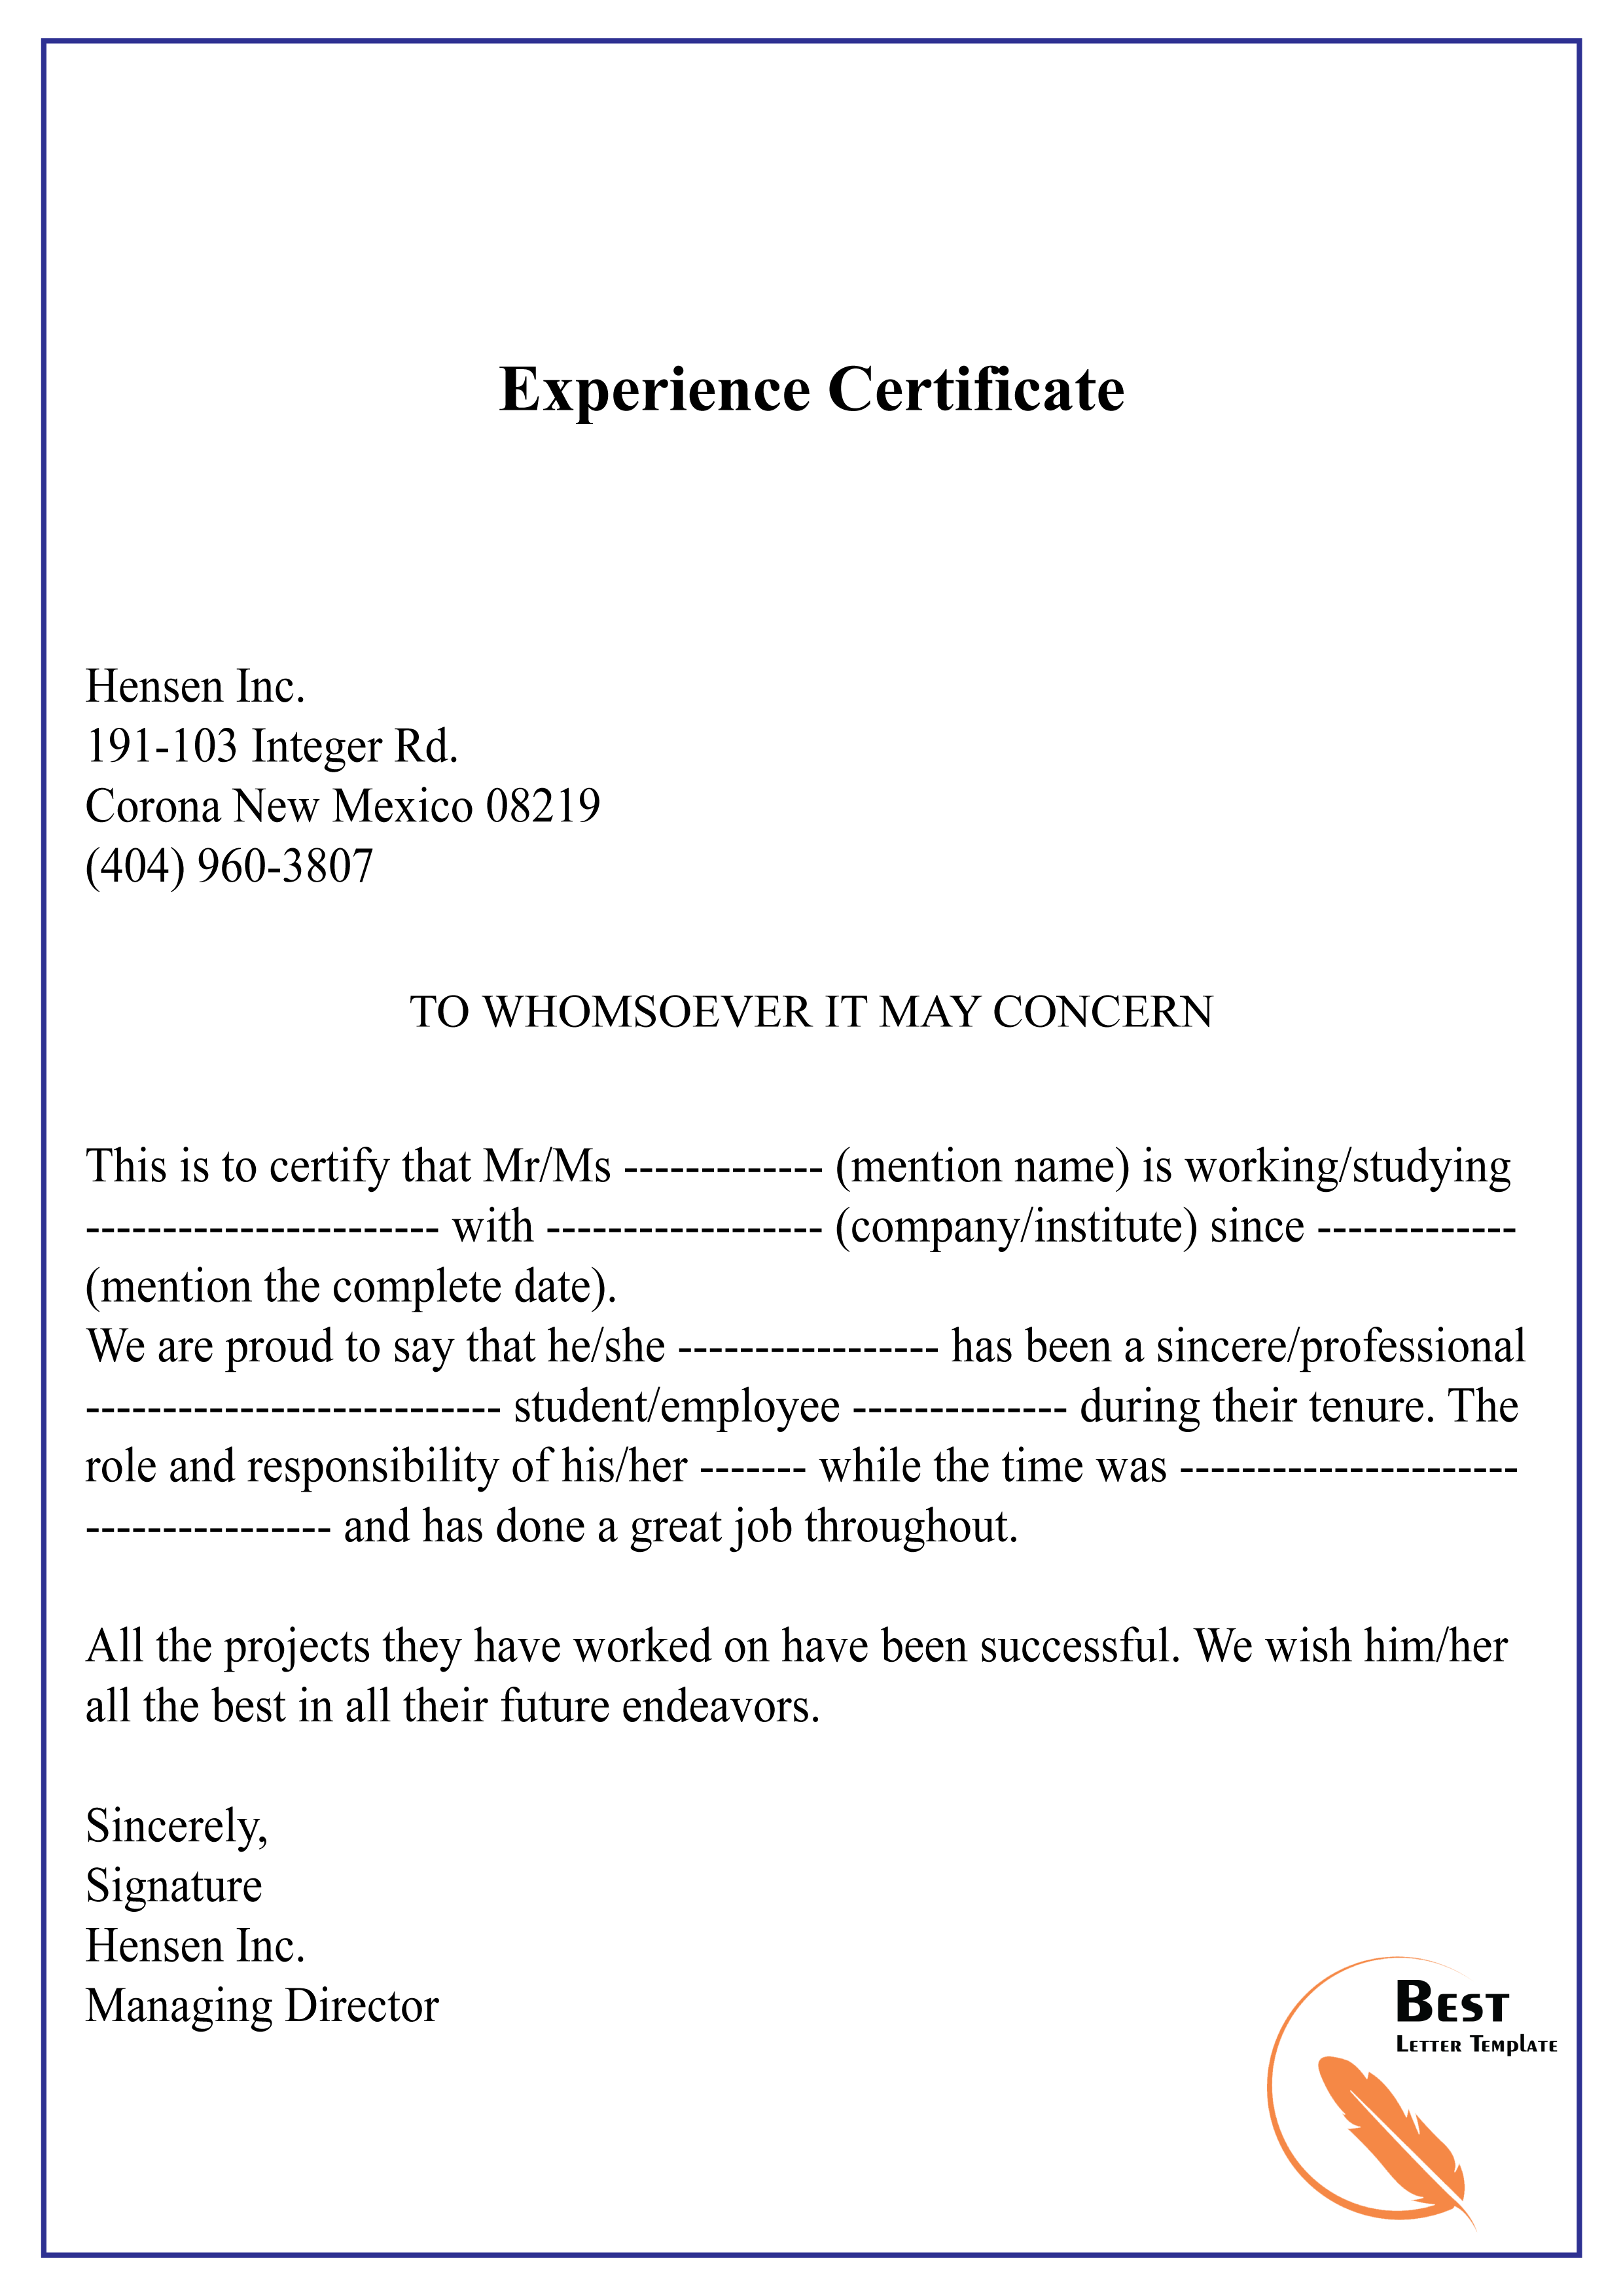 experience certificate format ibm